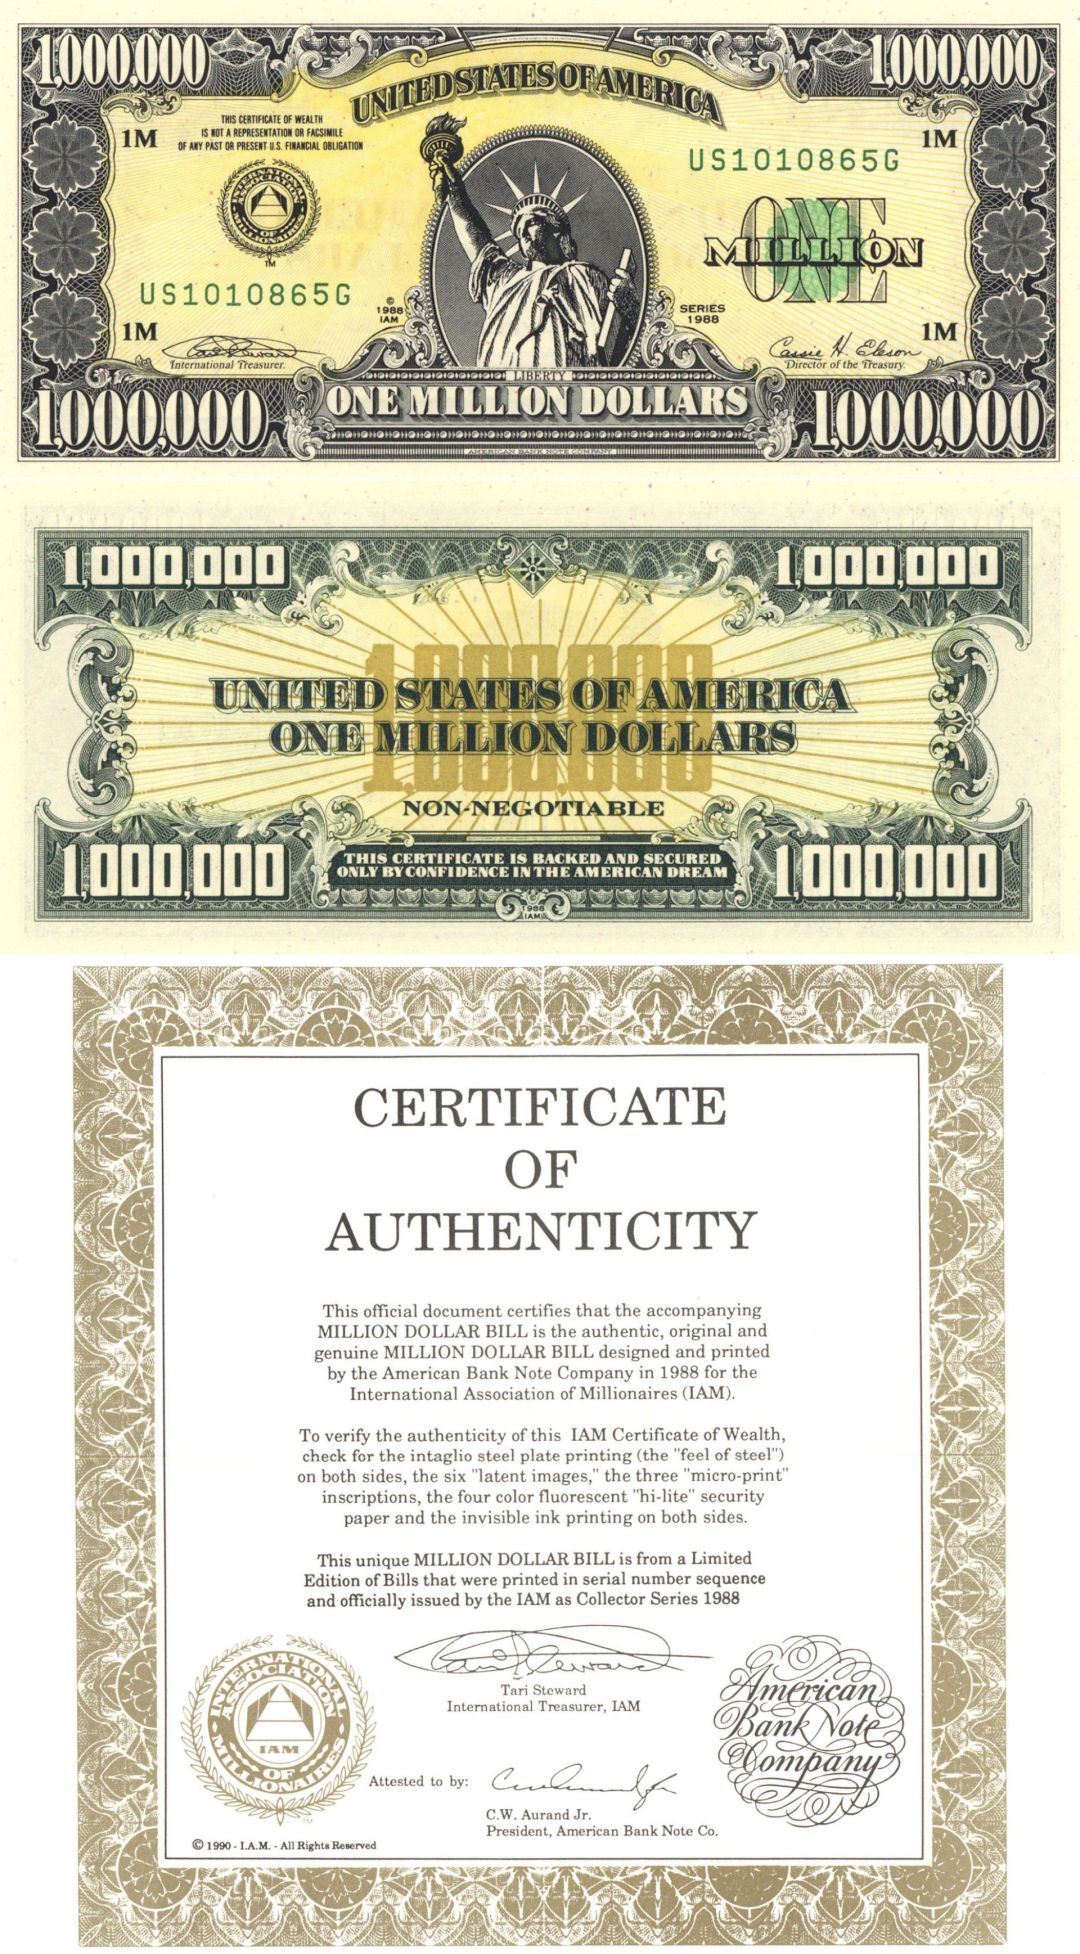 $1,000,000 Note - 1988 dated Million Dollar Bill Novelty made by American Banknote Co. - Authentication Included